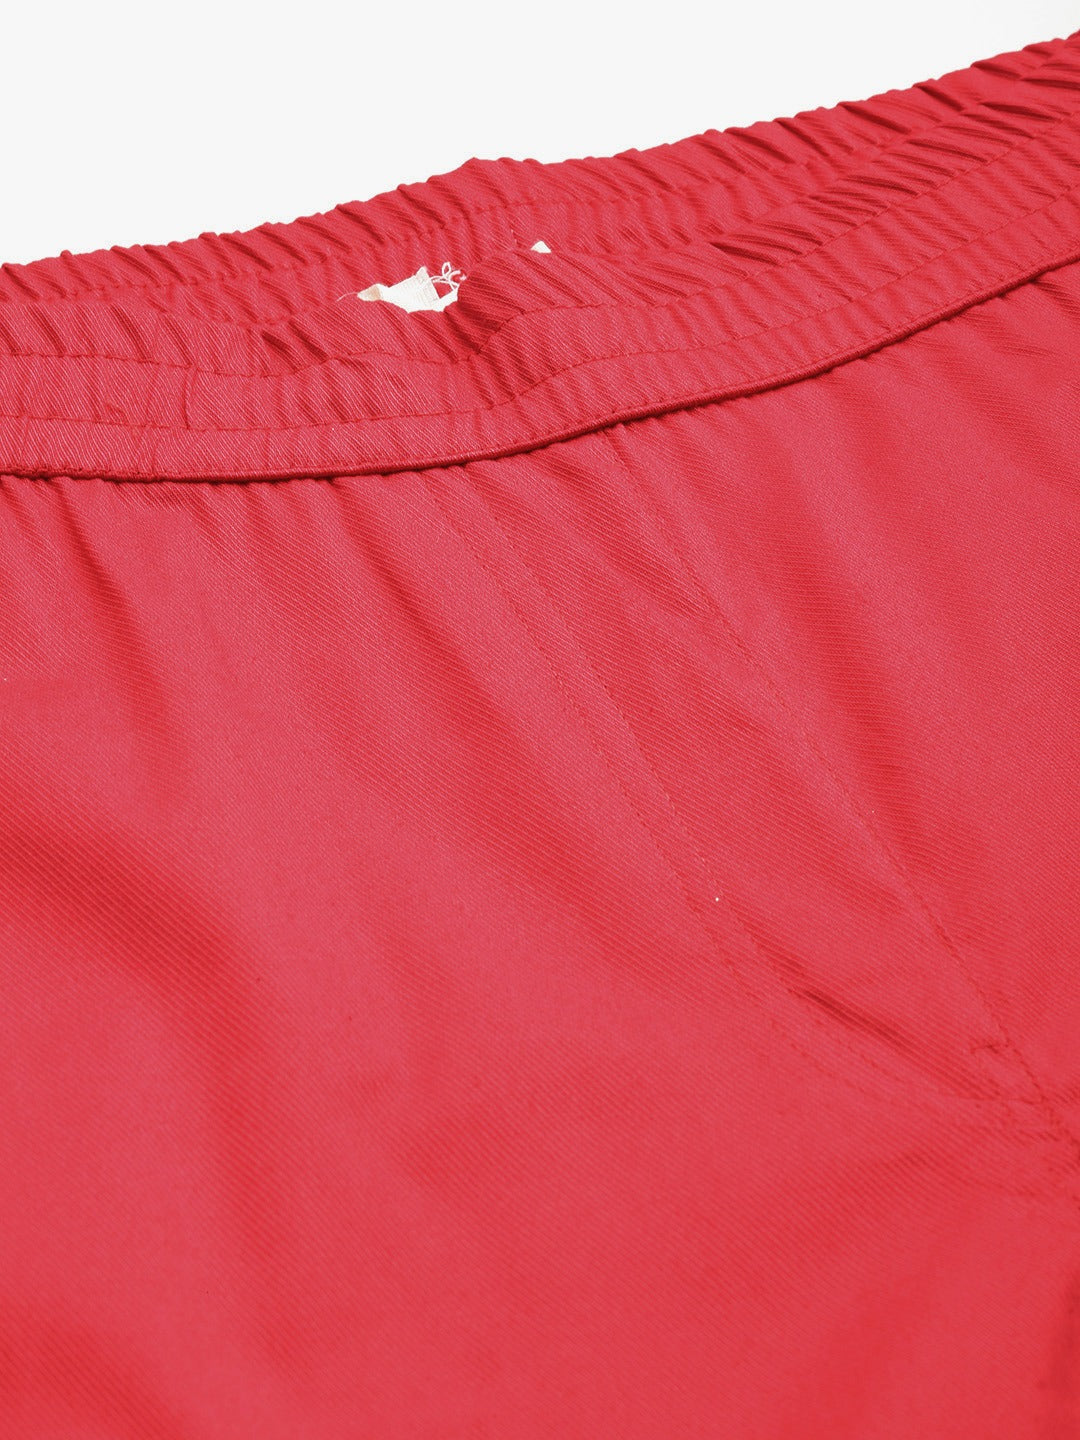 Cotton Lycra Fabric Red Color Trouser